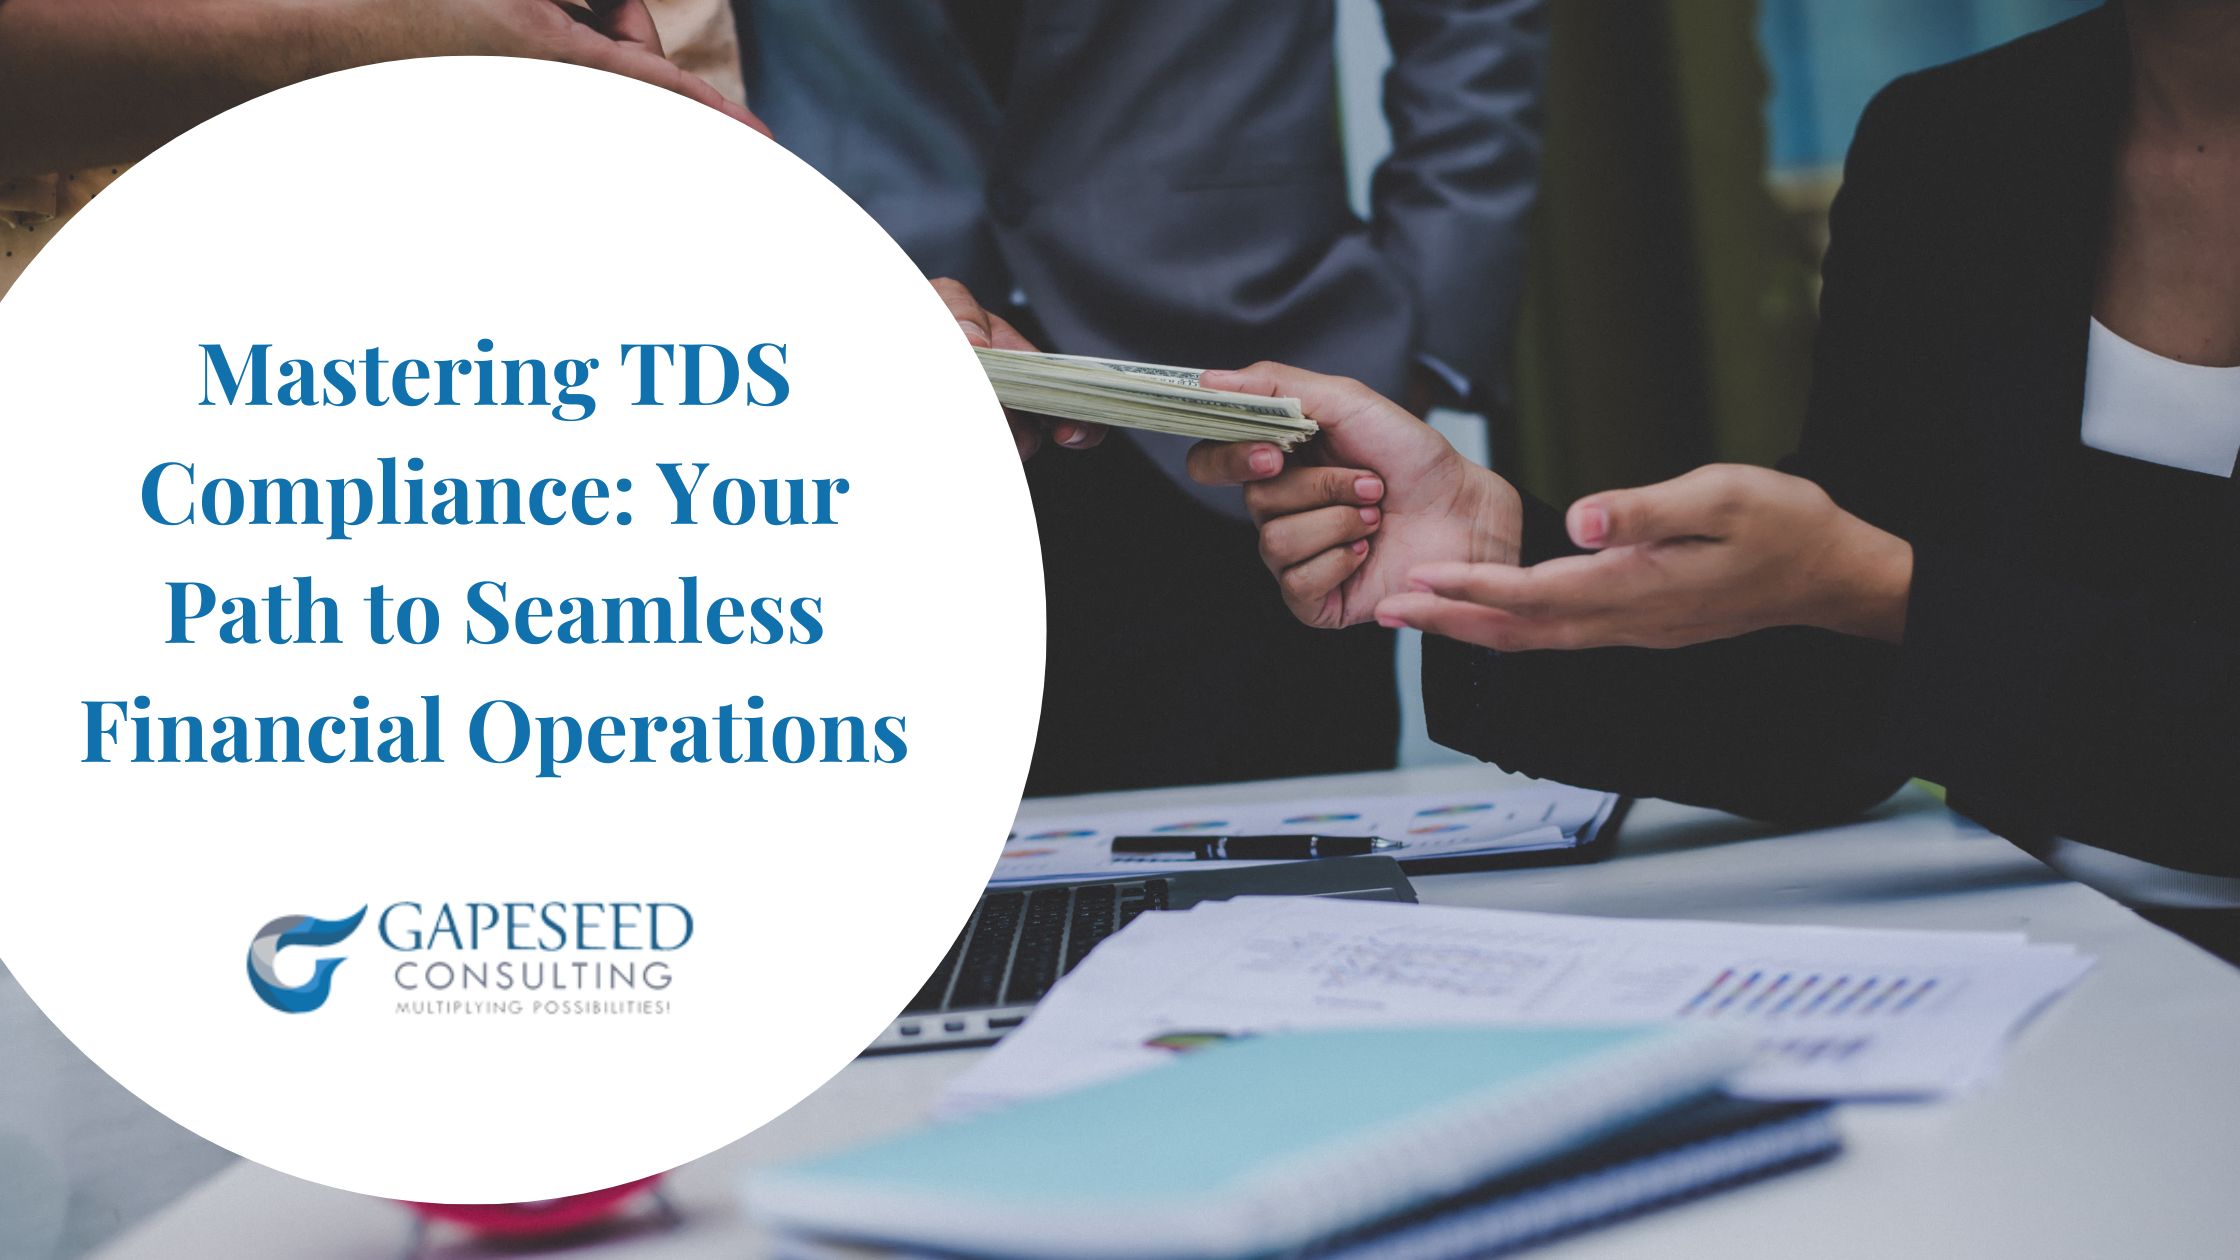 Mastering TDS Compliance: Your Path to Seamless Financial Operations